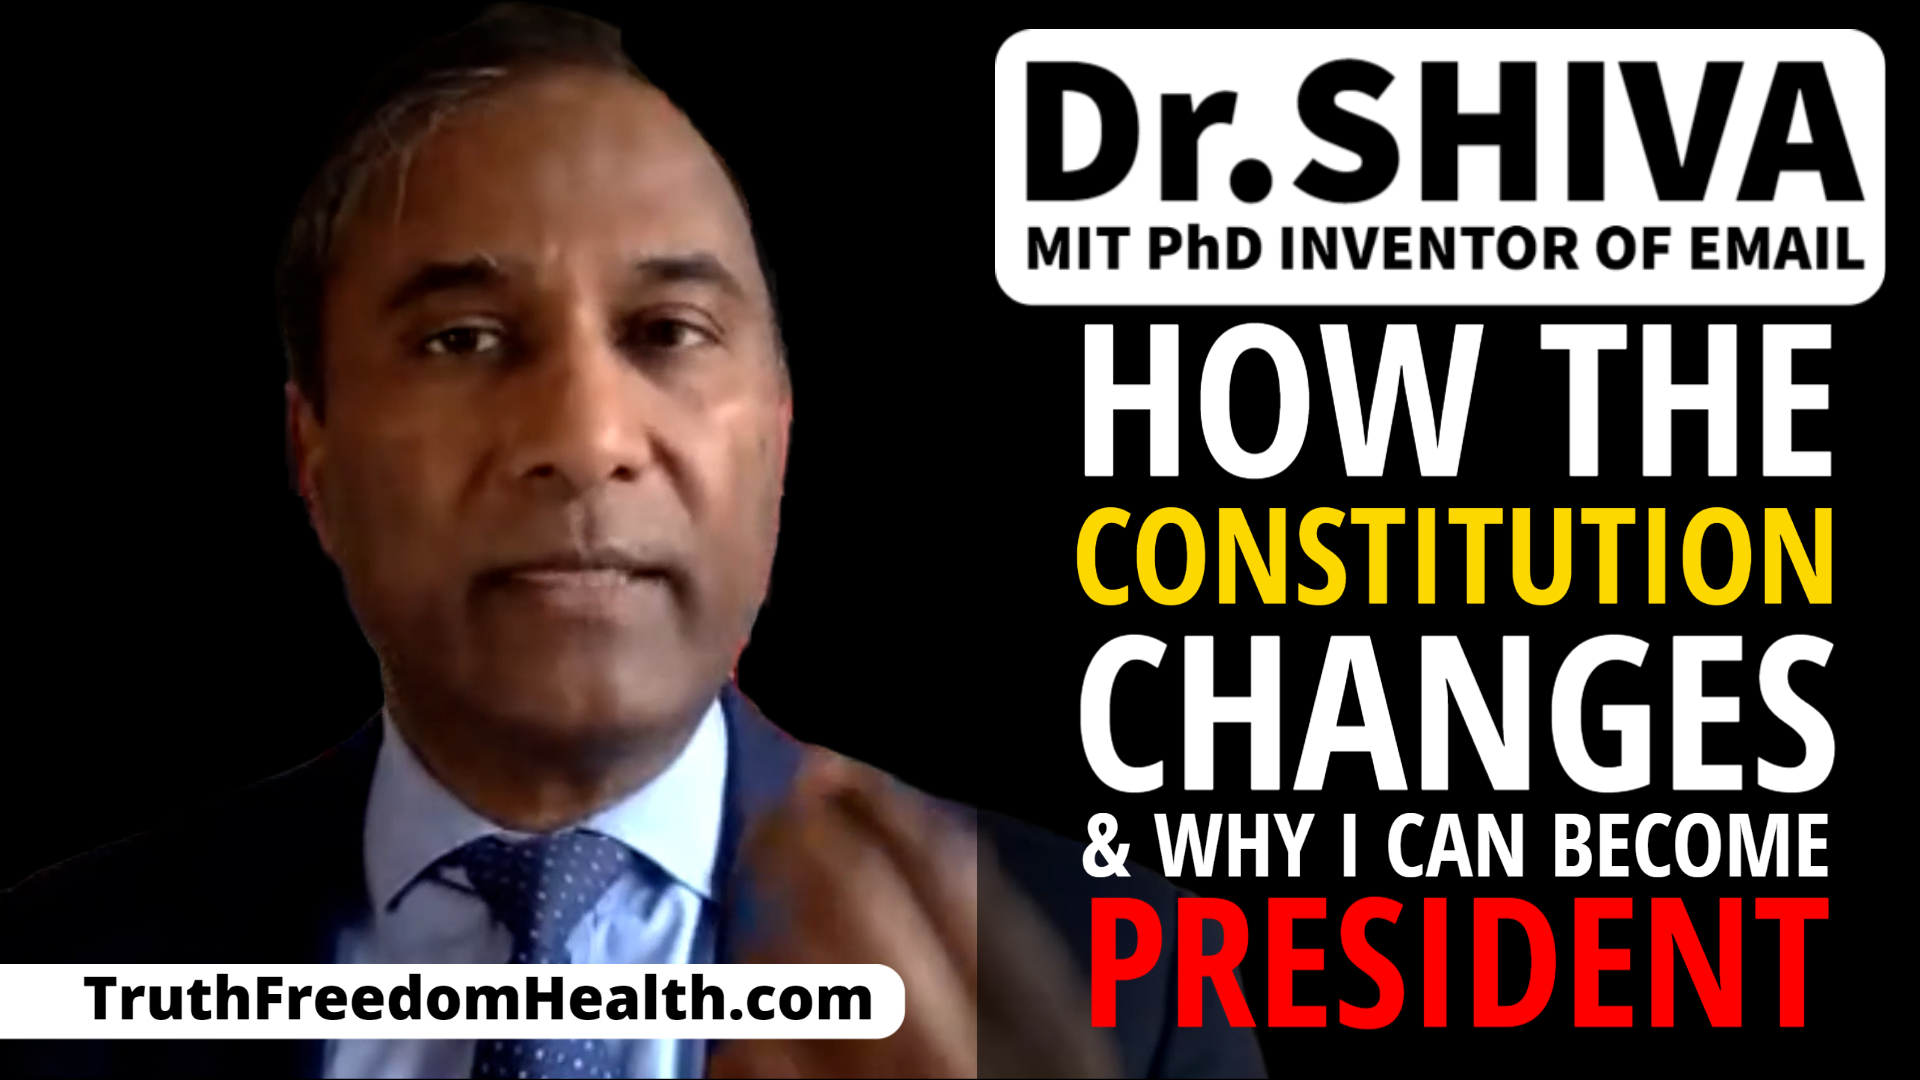 Dr.SHIVA LIVE: How The Constitution Changes & Why I Can Become President